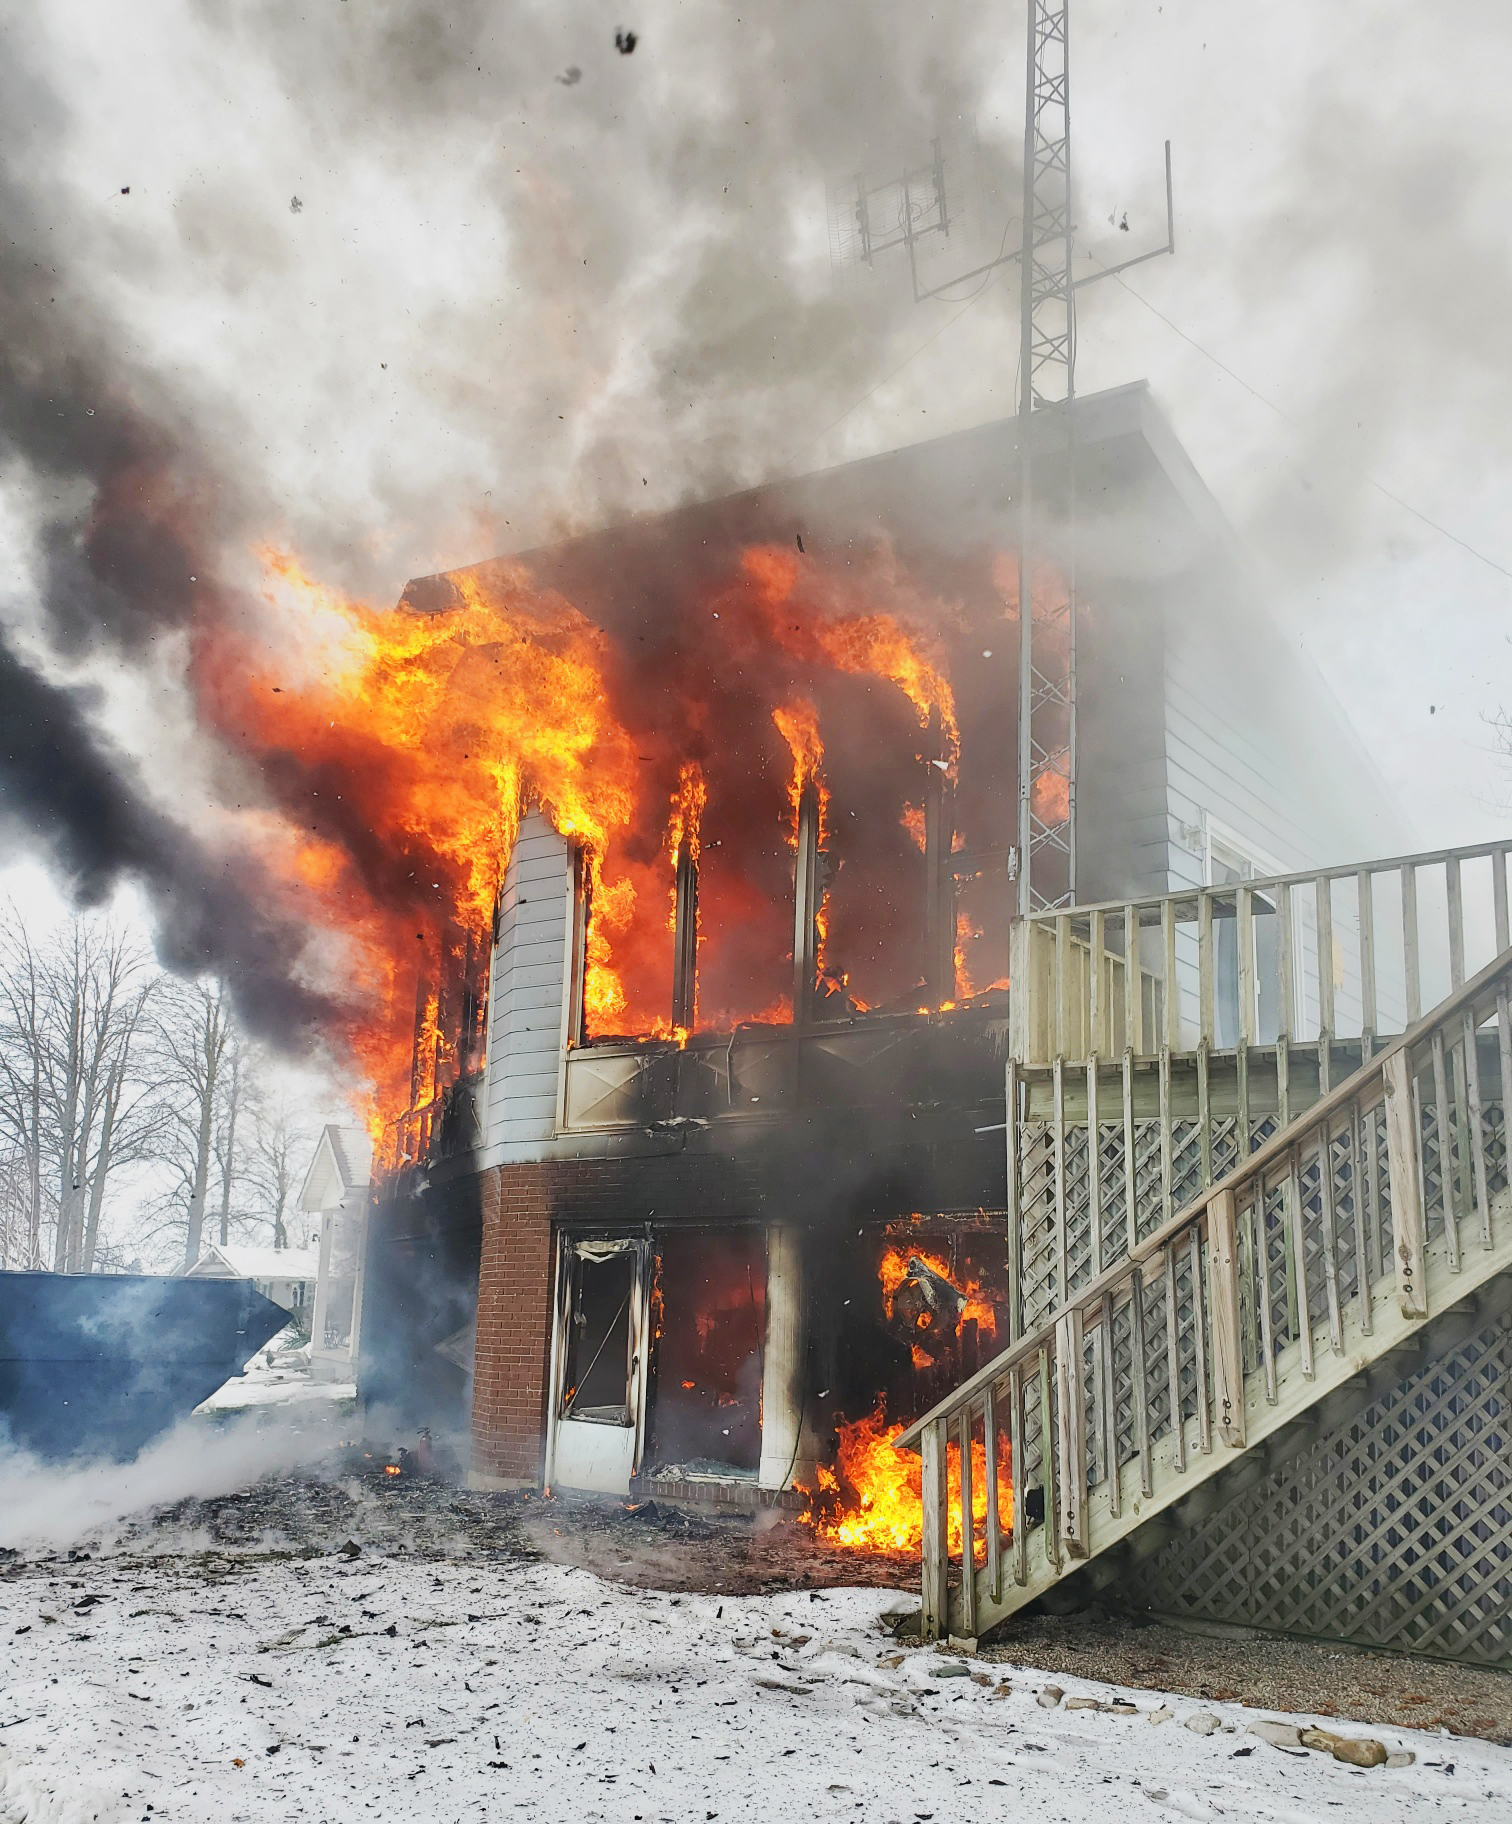 A recent house fire near the town of St. Marys where working smoke alarms were credited for there being no fatalities.